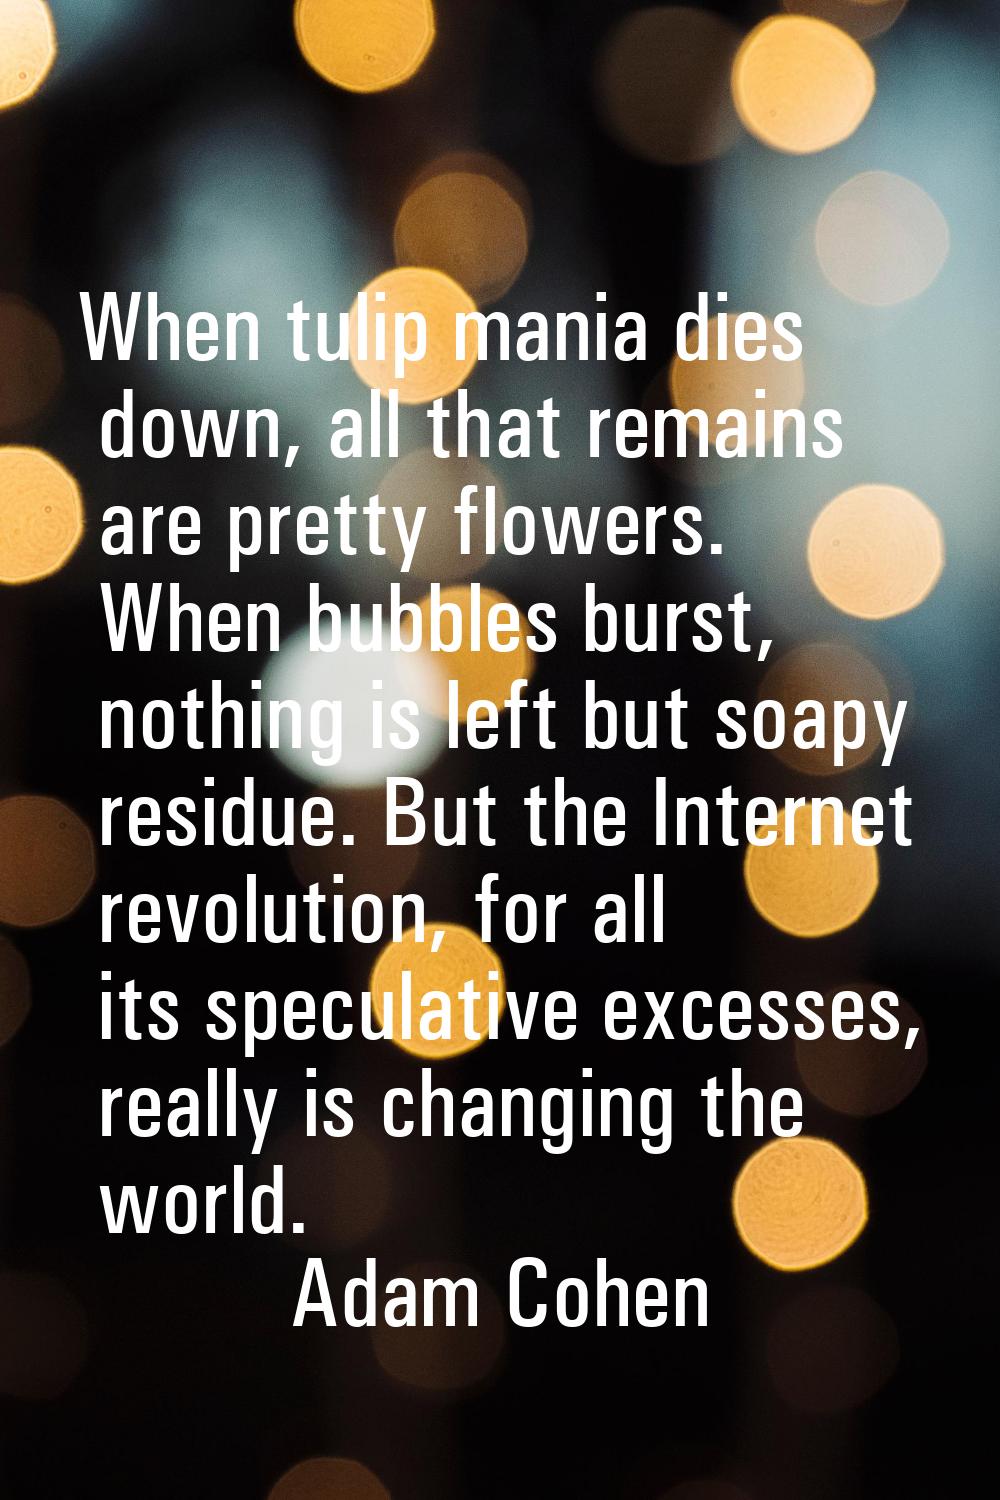 When tulip mania dies down, all that remains are pretty flowers. When bubbles burst, nothing is lef